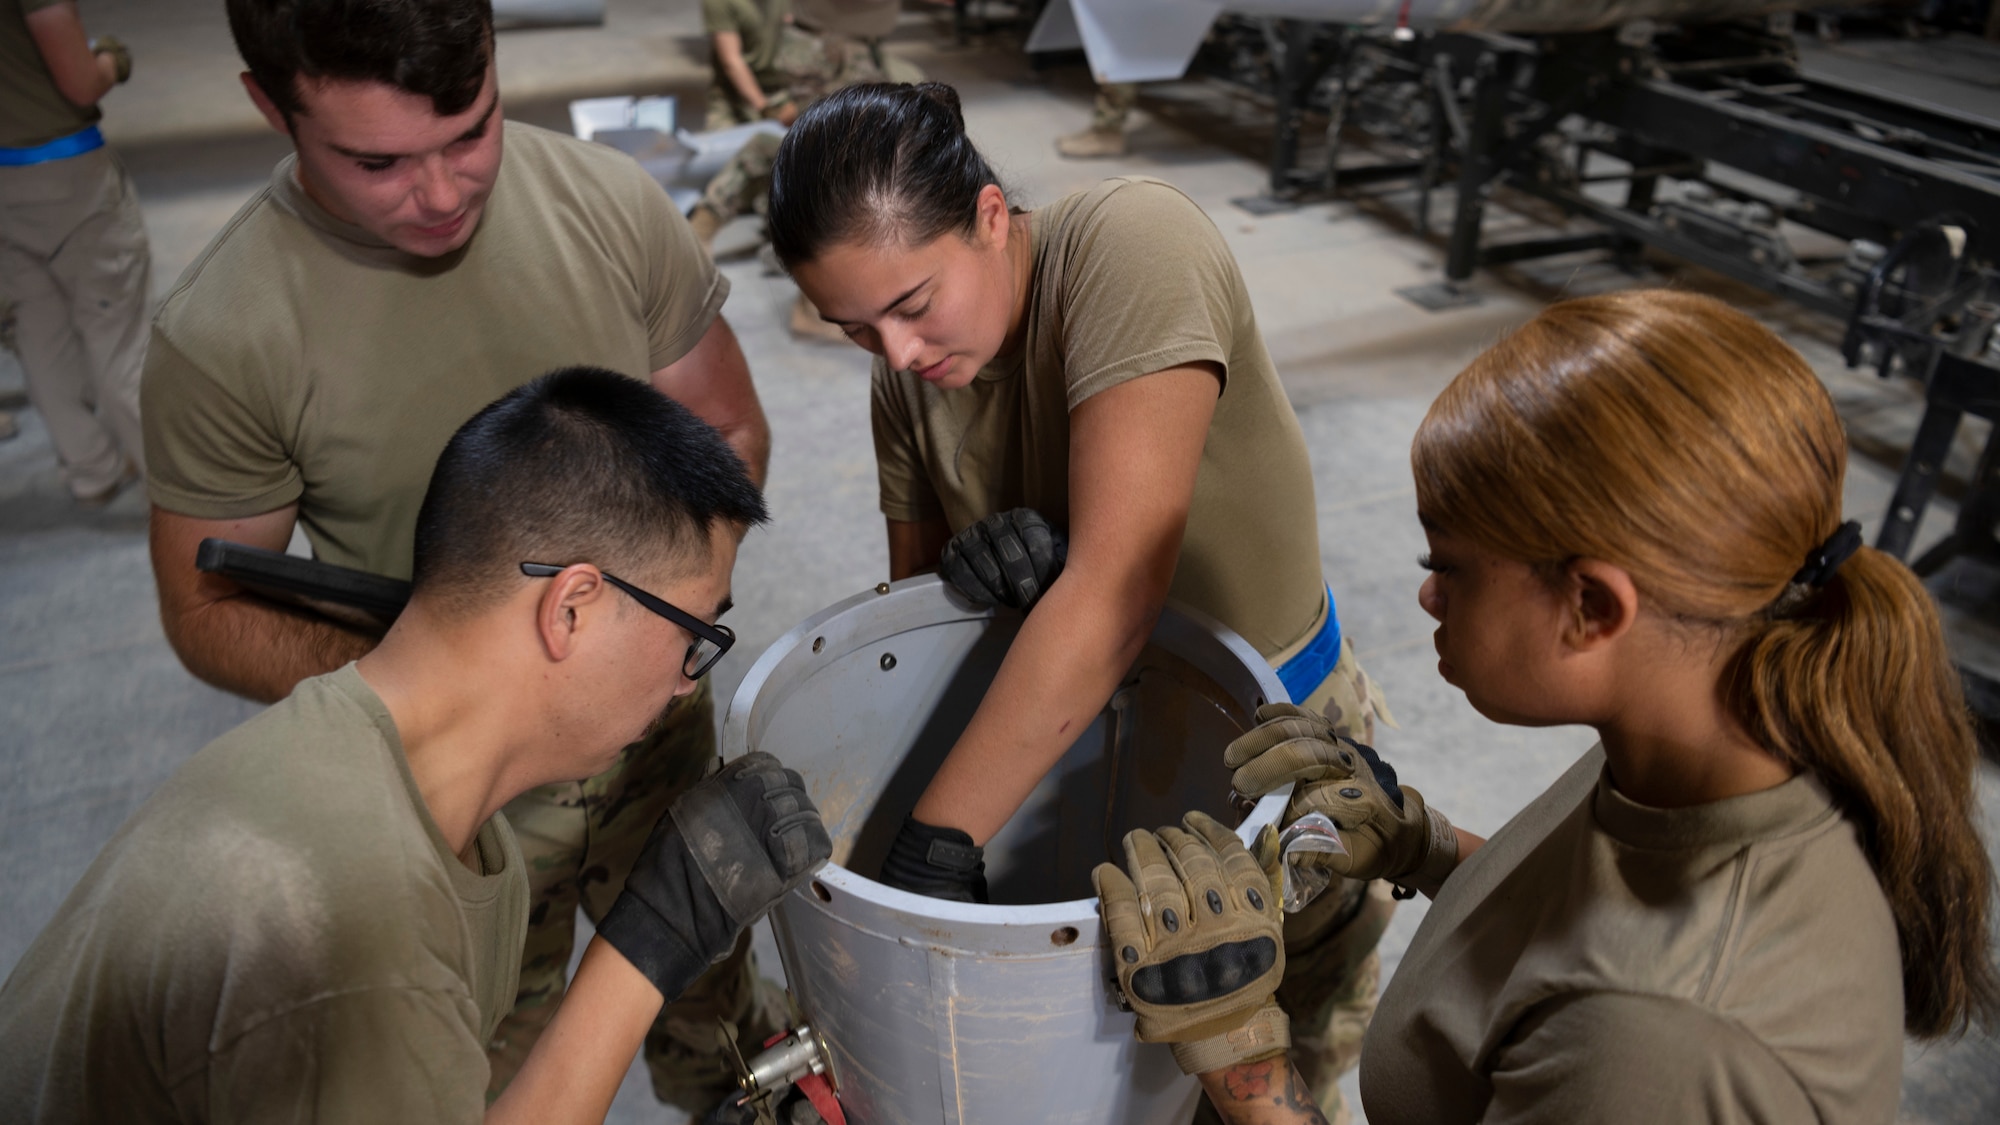 Four Munitions Systems specialists with the 332d Expeditionary Maintenance Squadron, Munitions Flight, assemble the tail section of an MK-84 conical bomb. These bombs are capable of penetrating up to 11 feet of concrete and spreading shrapnel in a 400 yard radius. (U.S. Air Force photo by: Tech. Sgt. Jeffery Foster)